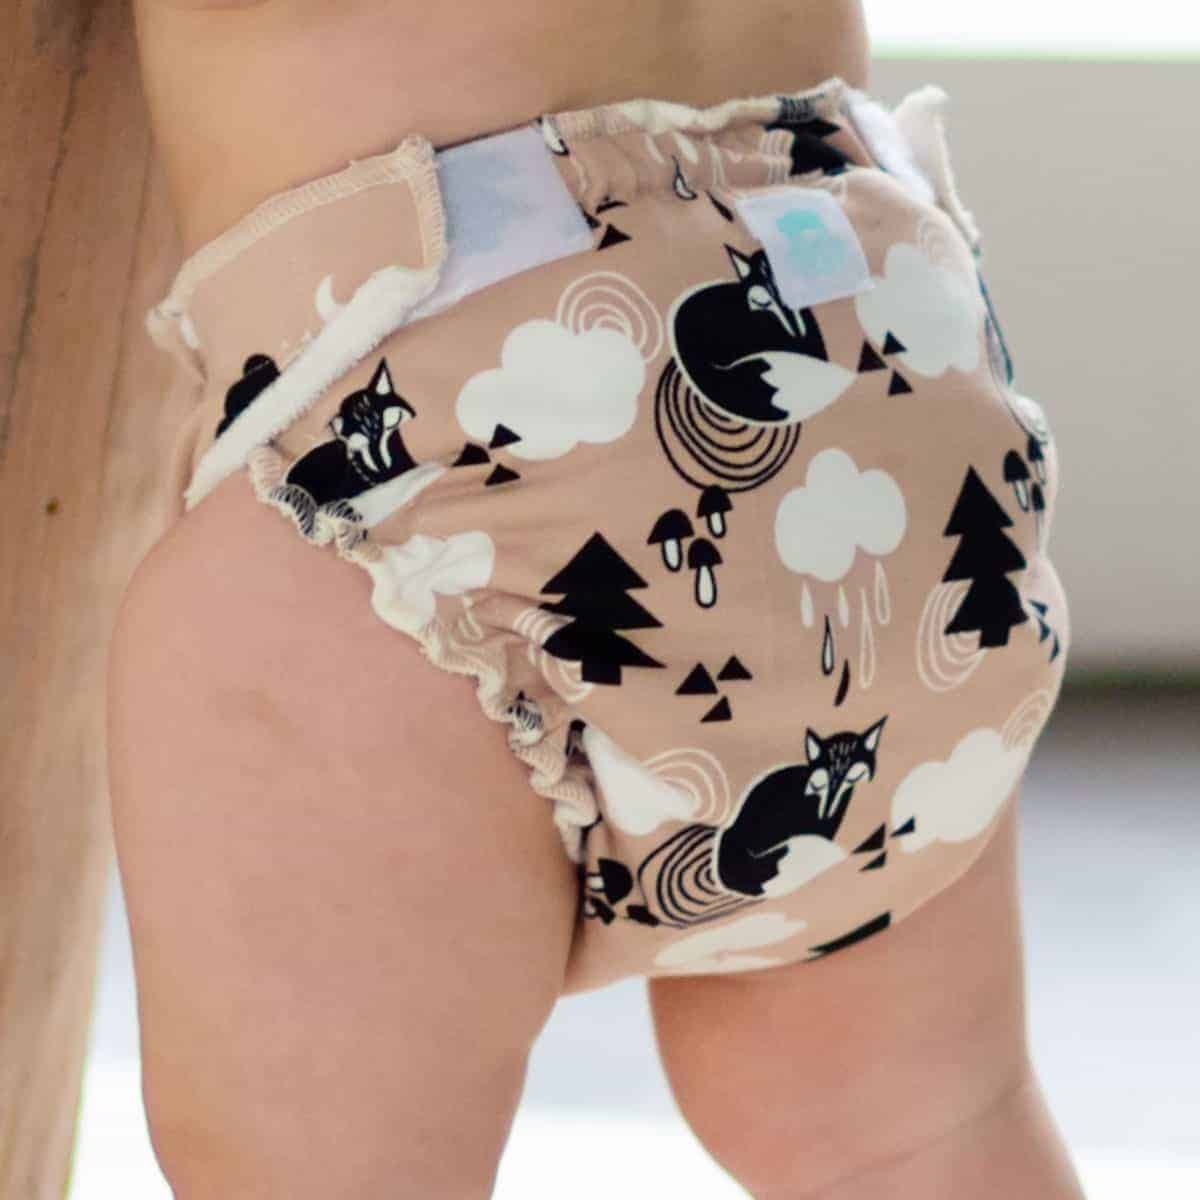 Kit Fitted Newborn - Cloth diapers